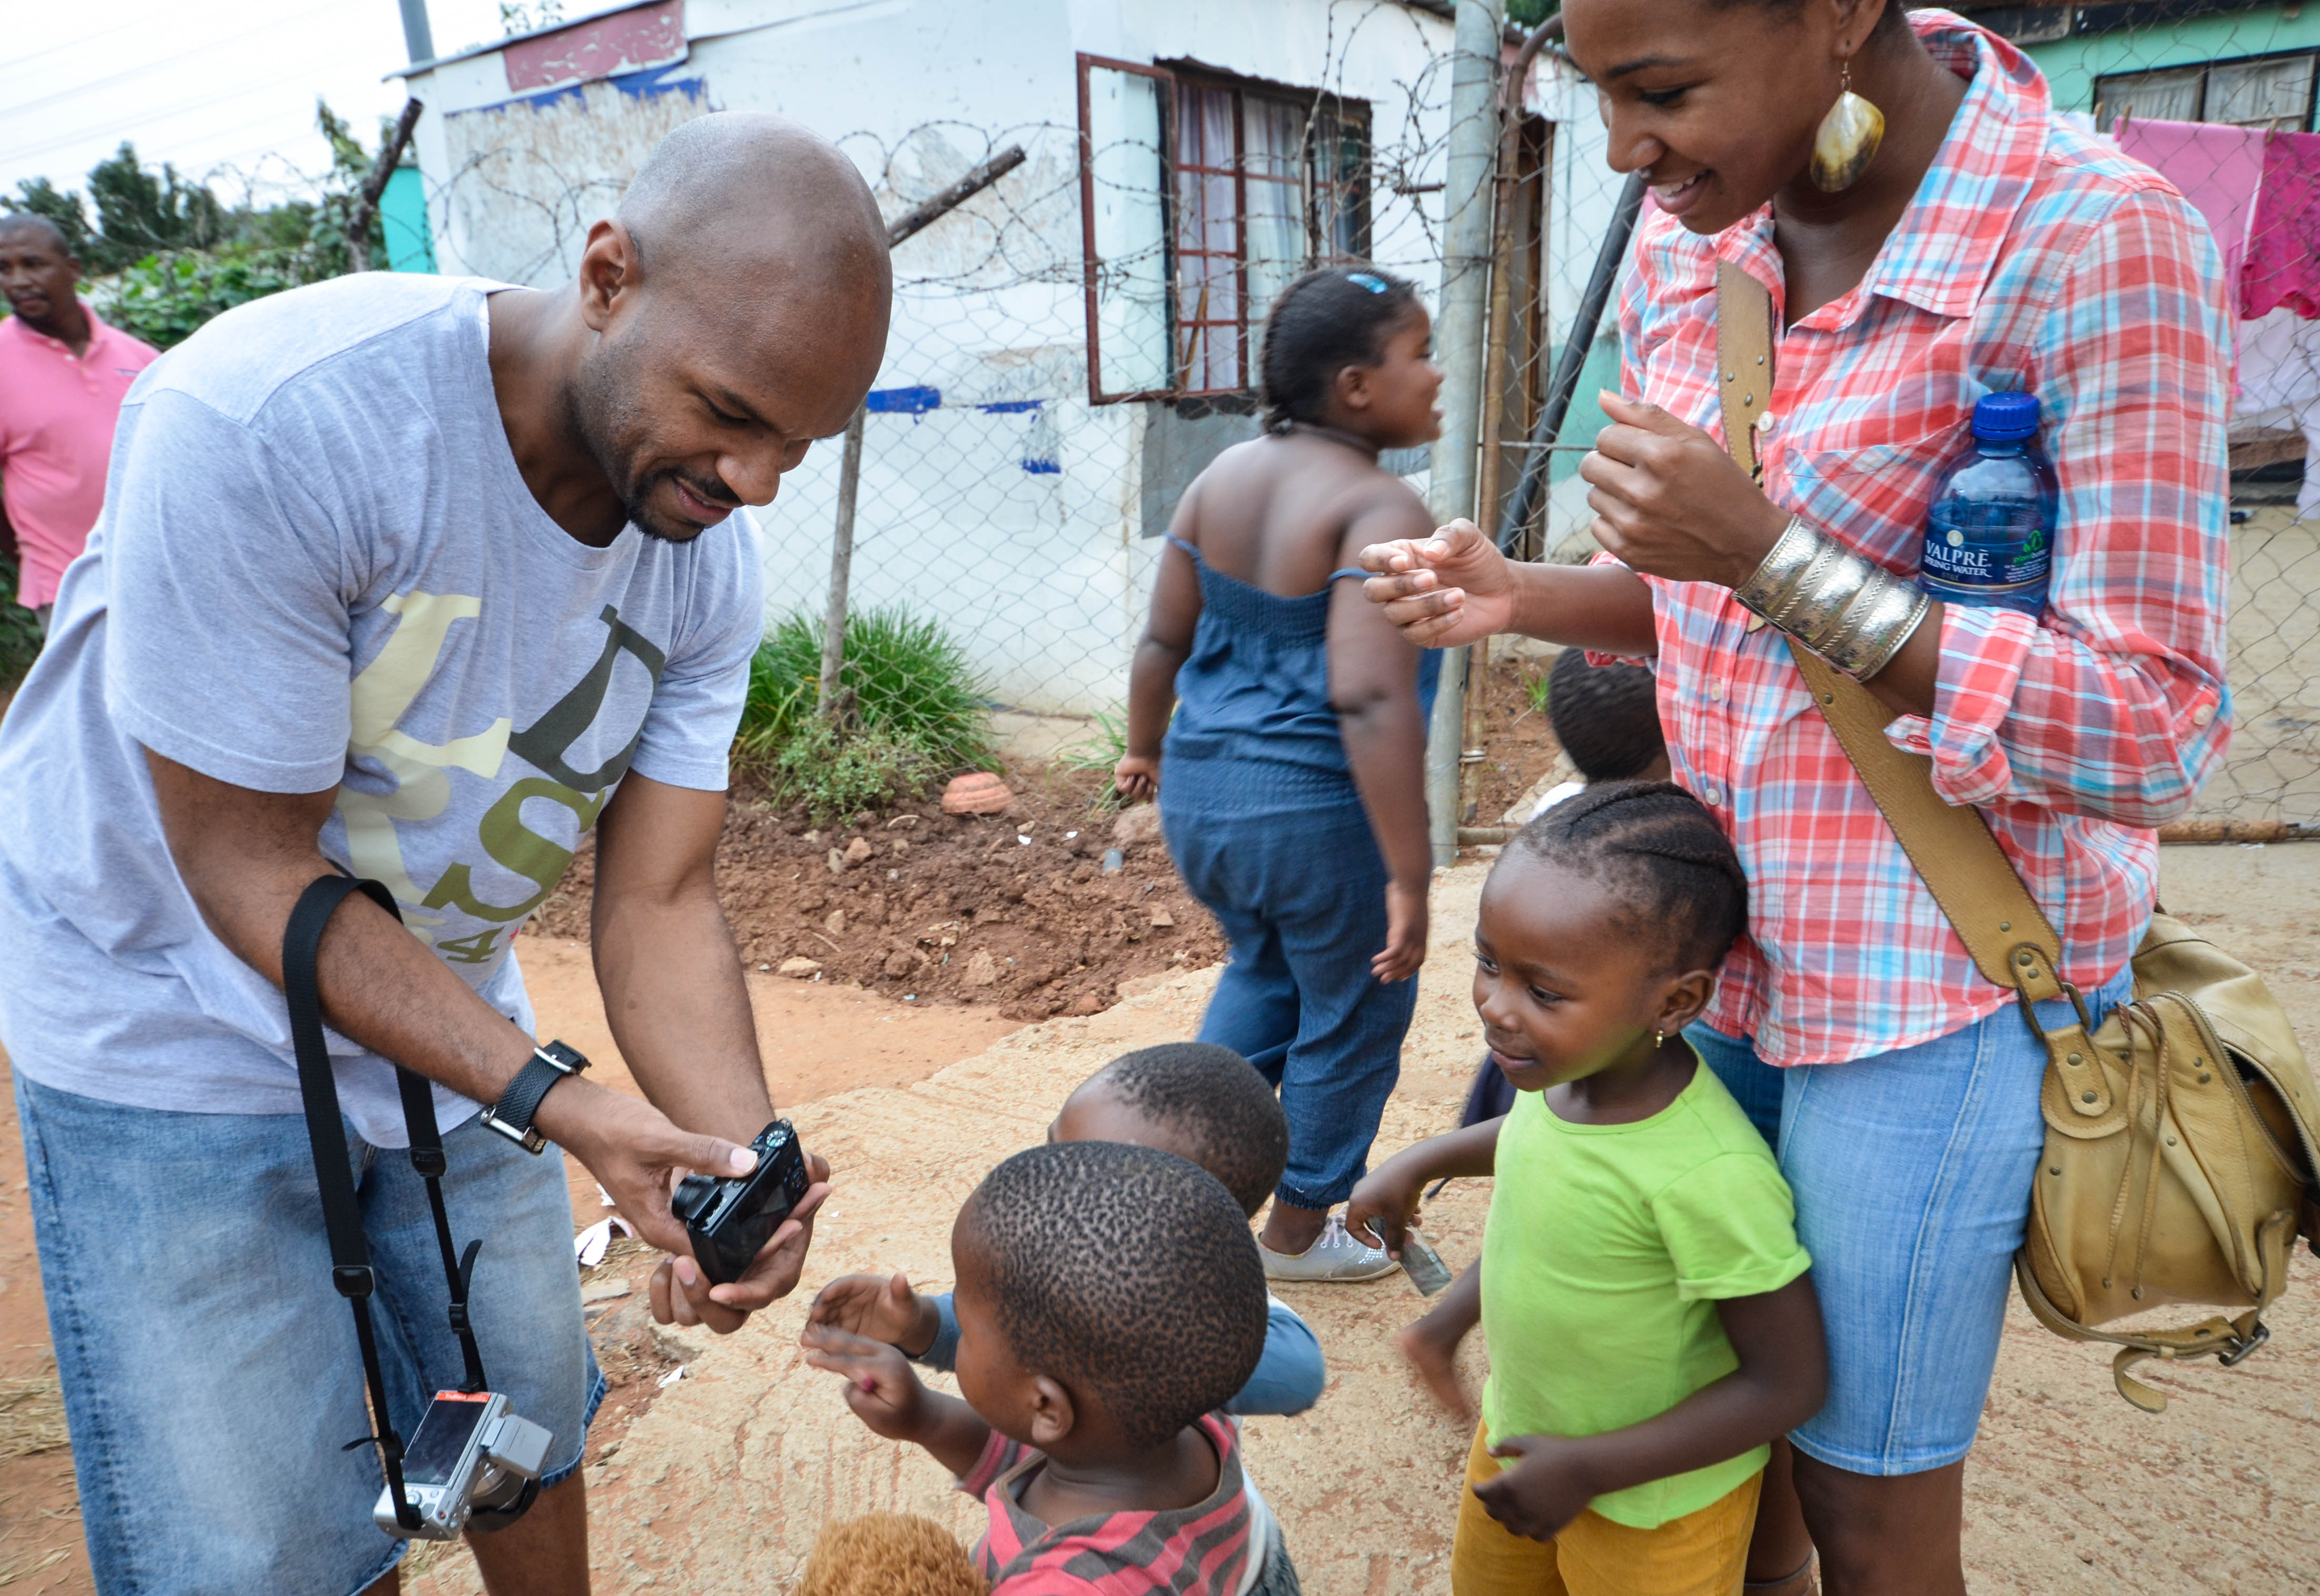 Kids are eager to see their own photo in Johannesburg's Motsoaledi township